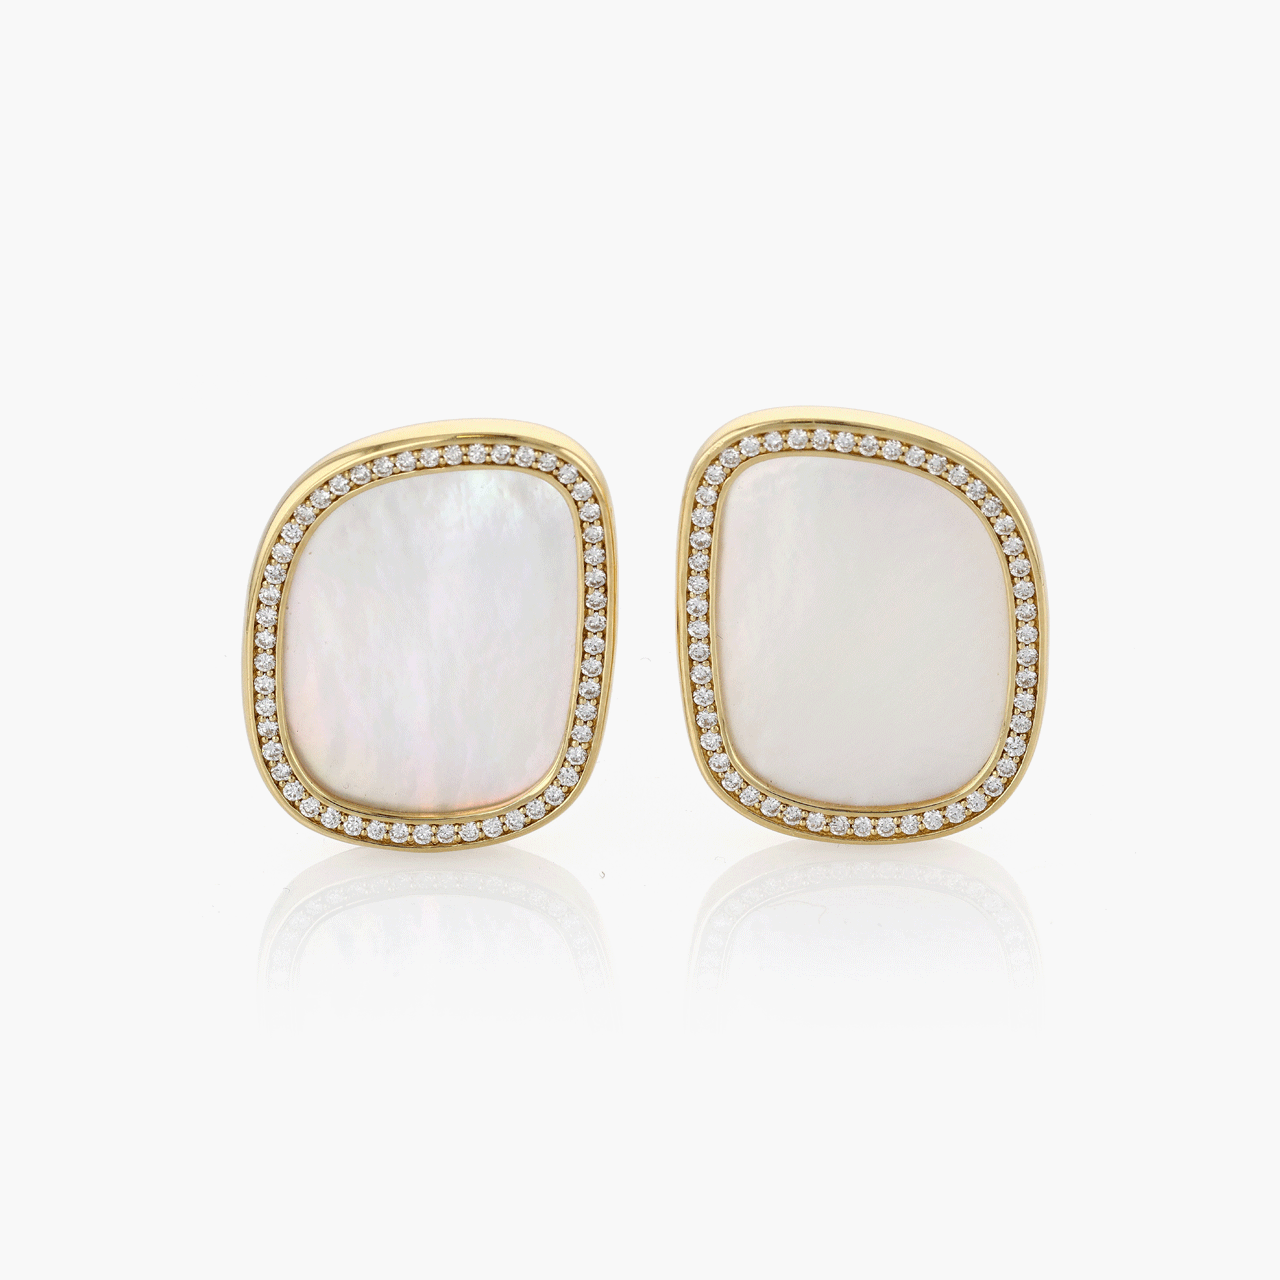 Roberto Coin 18KT Gold Mother of Pearl Earrings